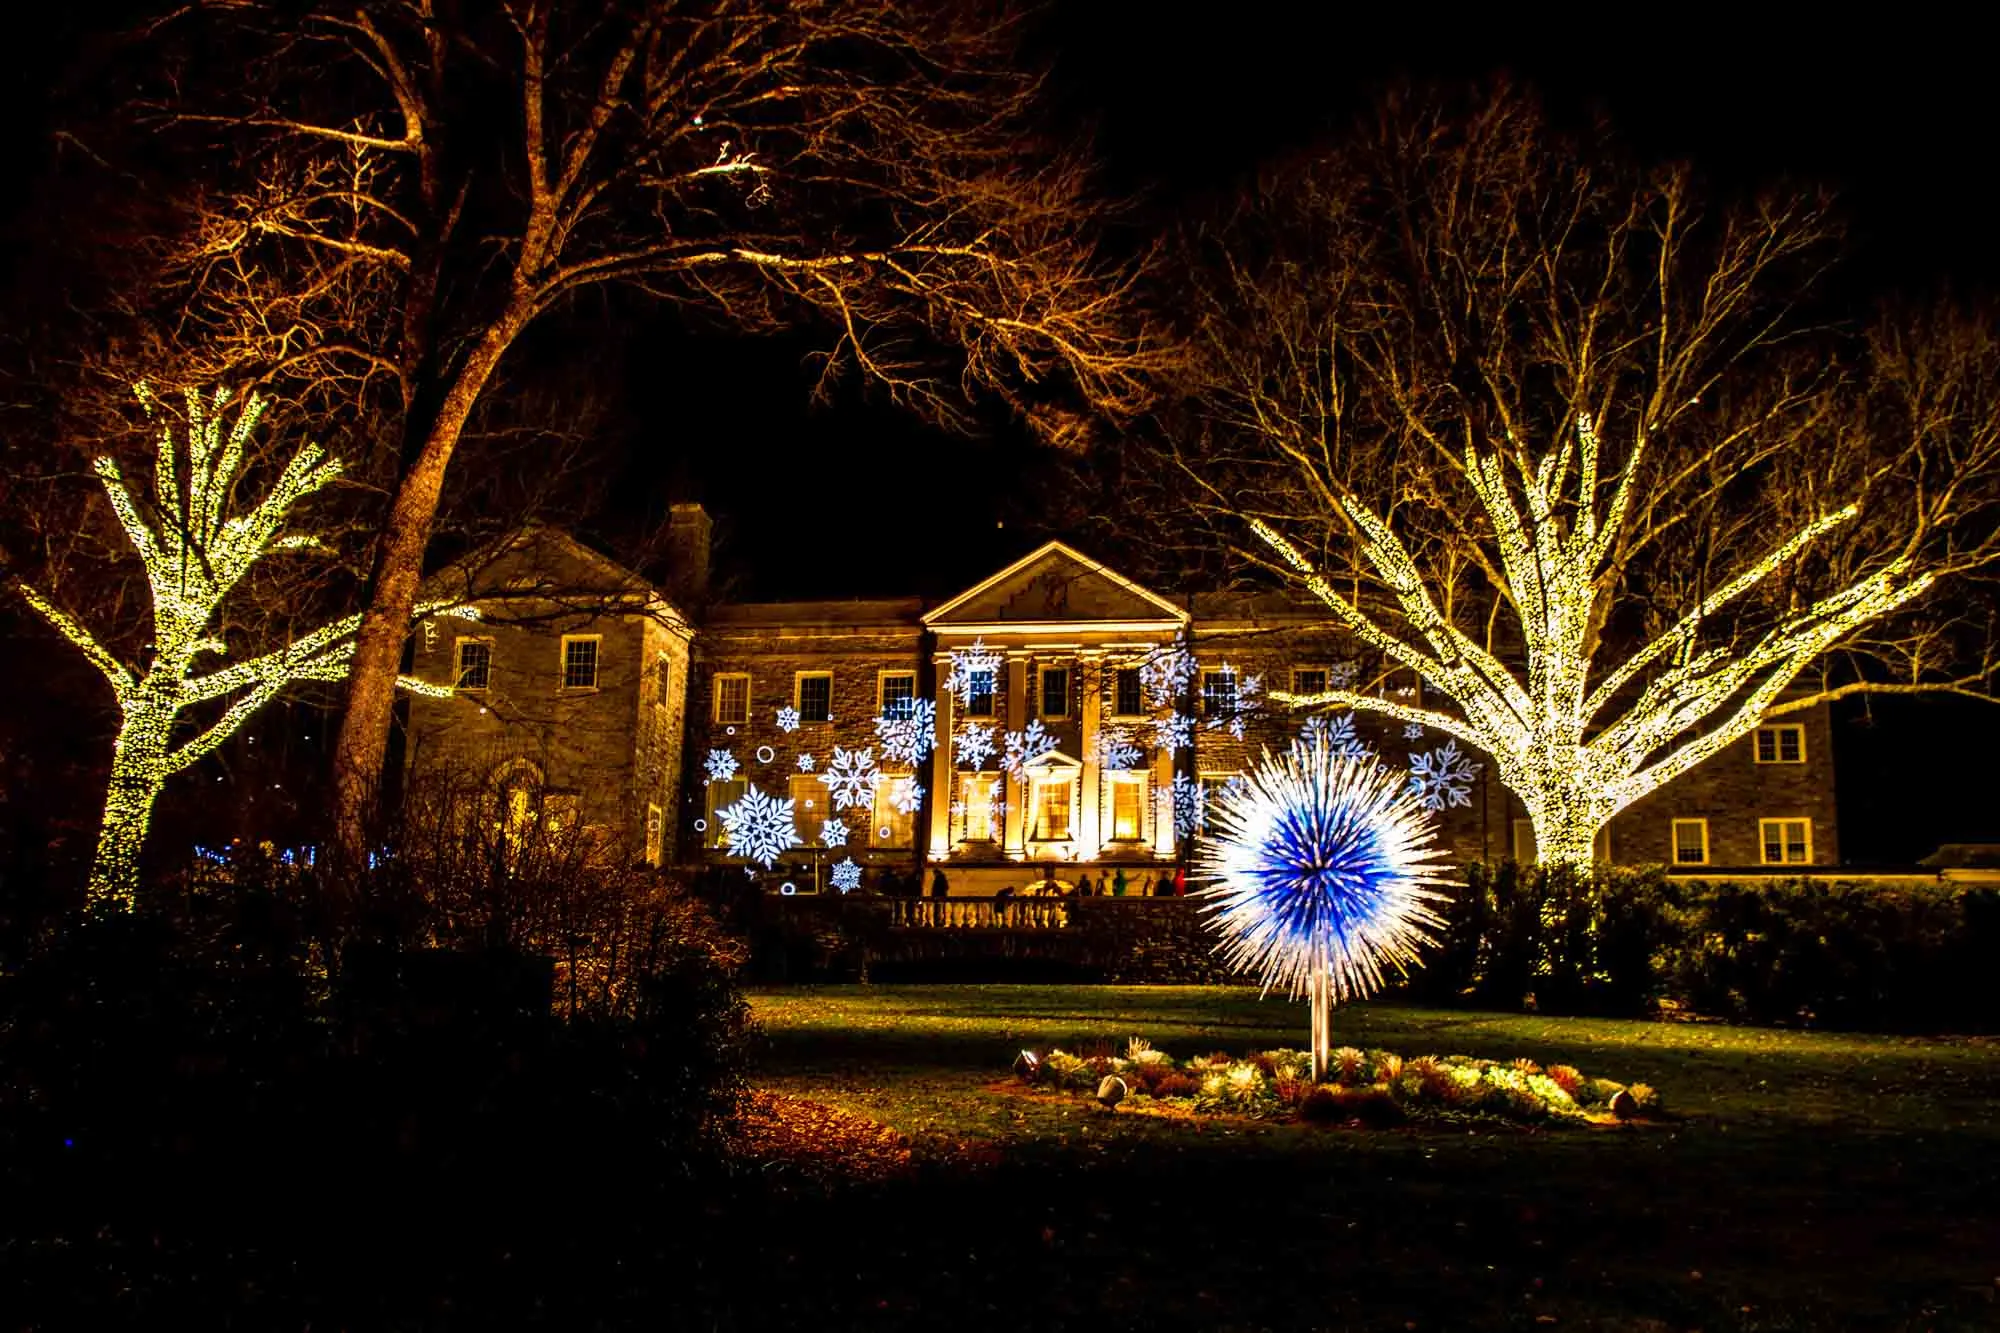 Snowflake lights projected on a mansion facade beside lit up trees and an illuminated blue and white sculpture.